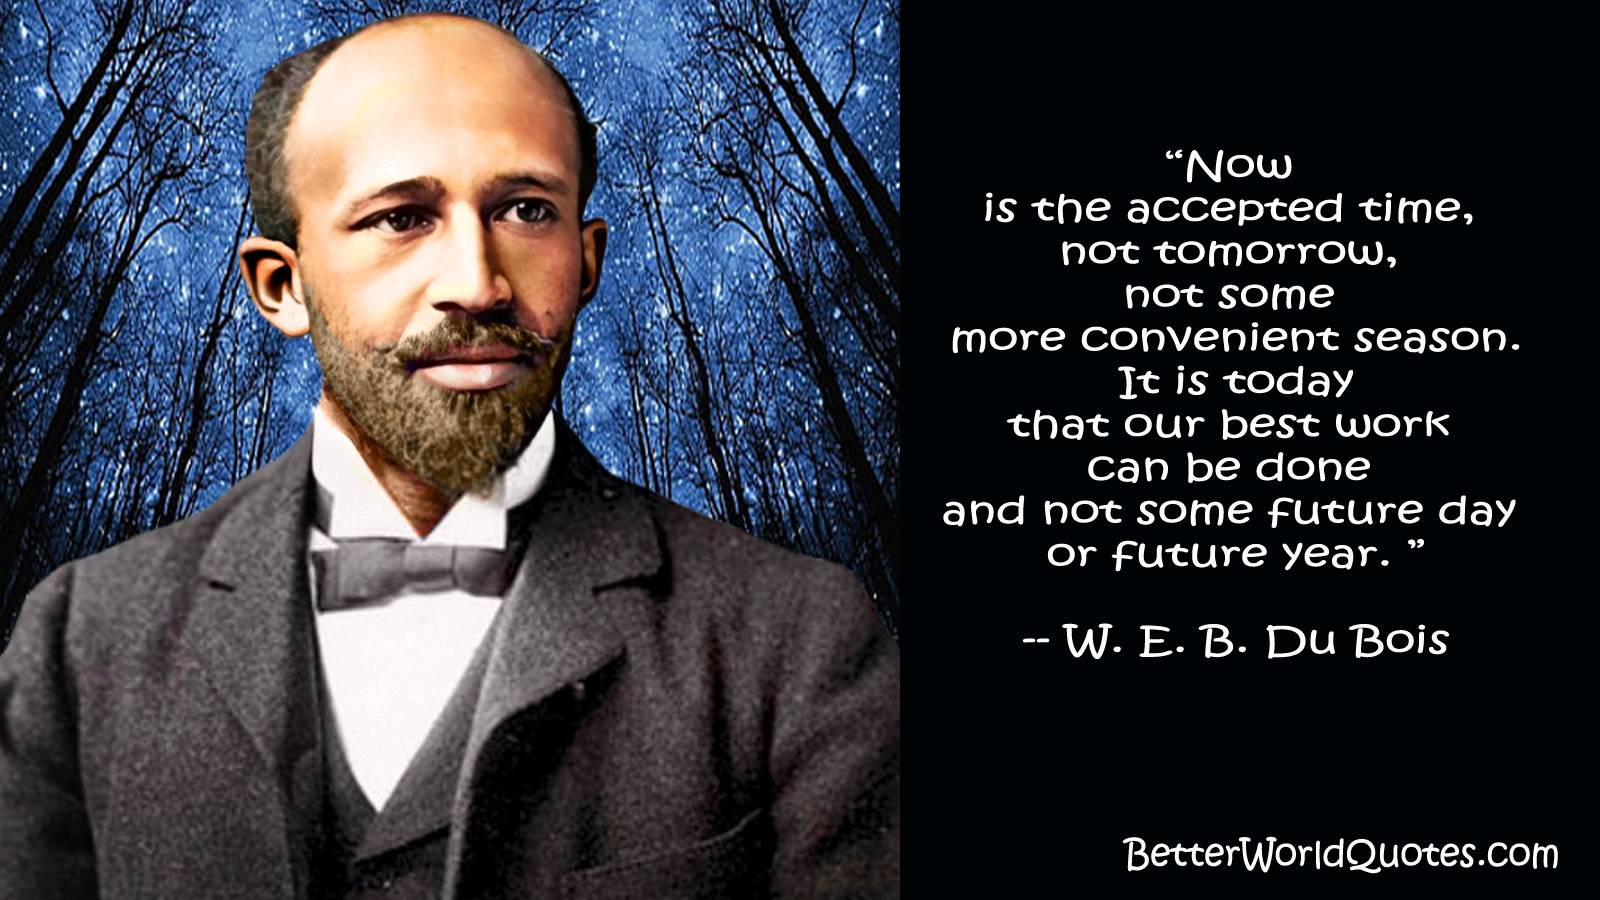 W. E. B. Du Bois: Now is the accepted time, not tomorrow, not some more convenient season. It is today that our best work can be done and not some future day or future year.